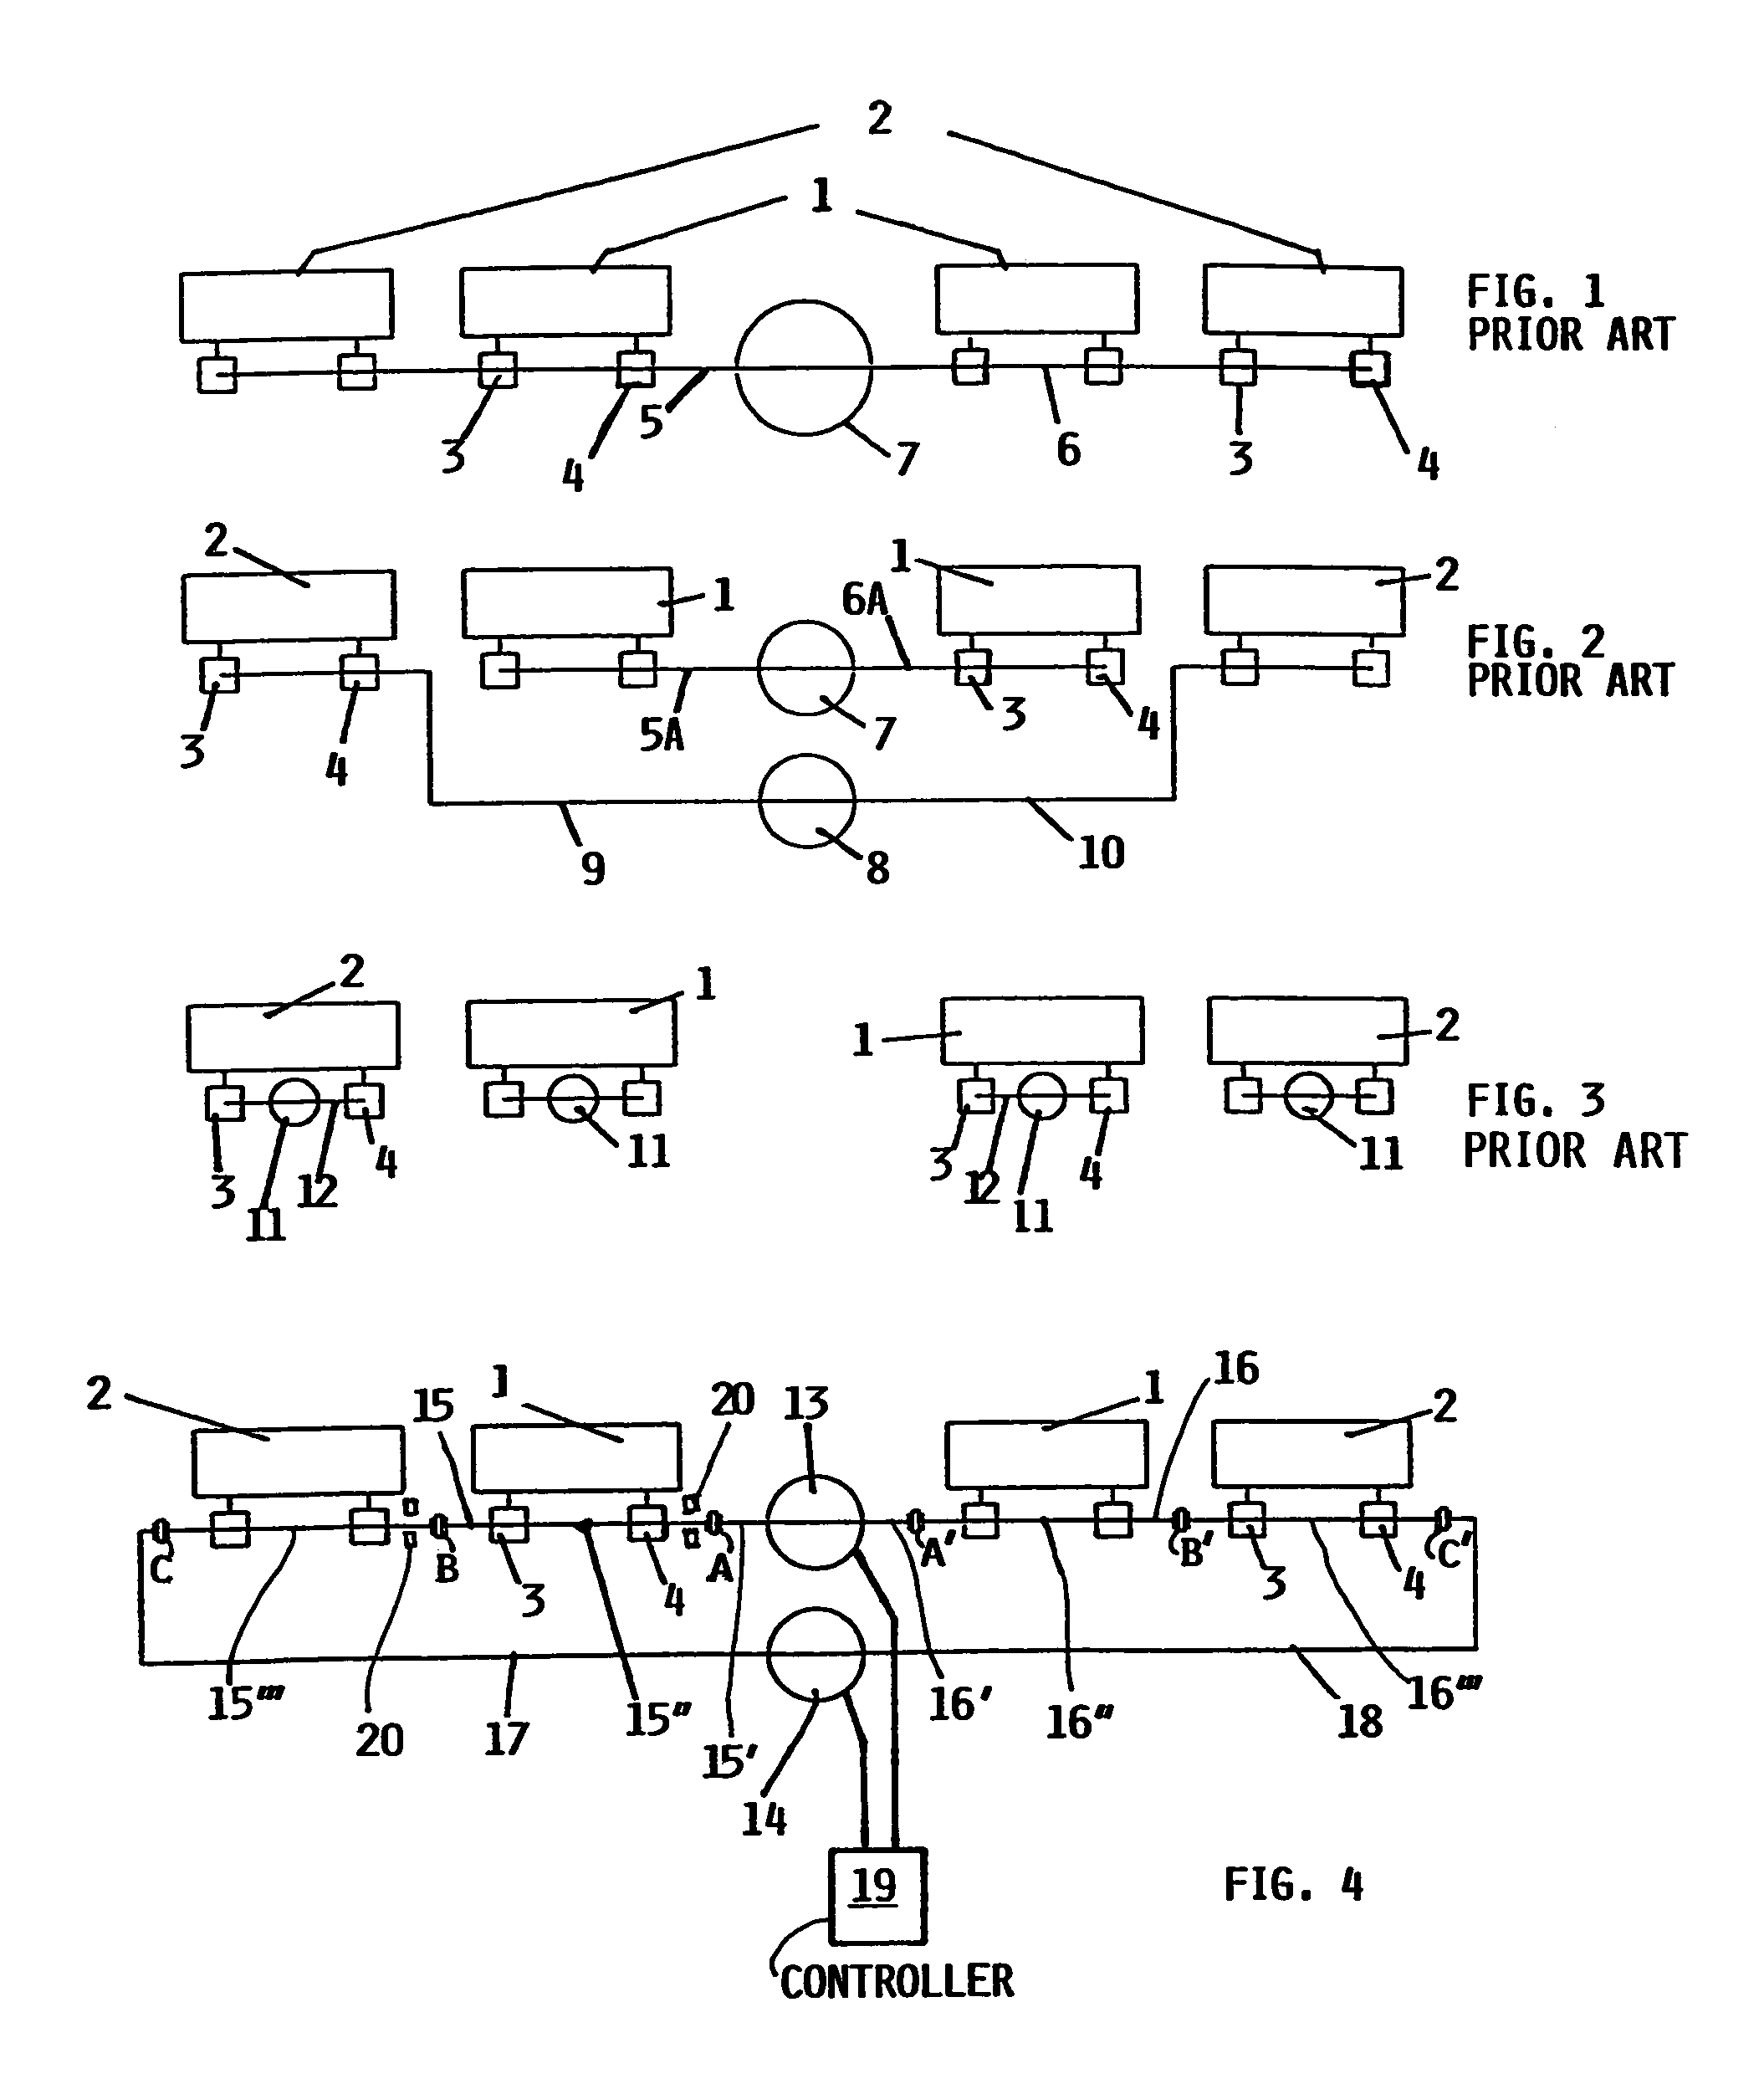 Aircraft flap or slat drive system with redundant drives and shaft drive lines